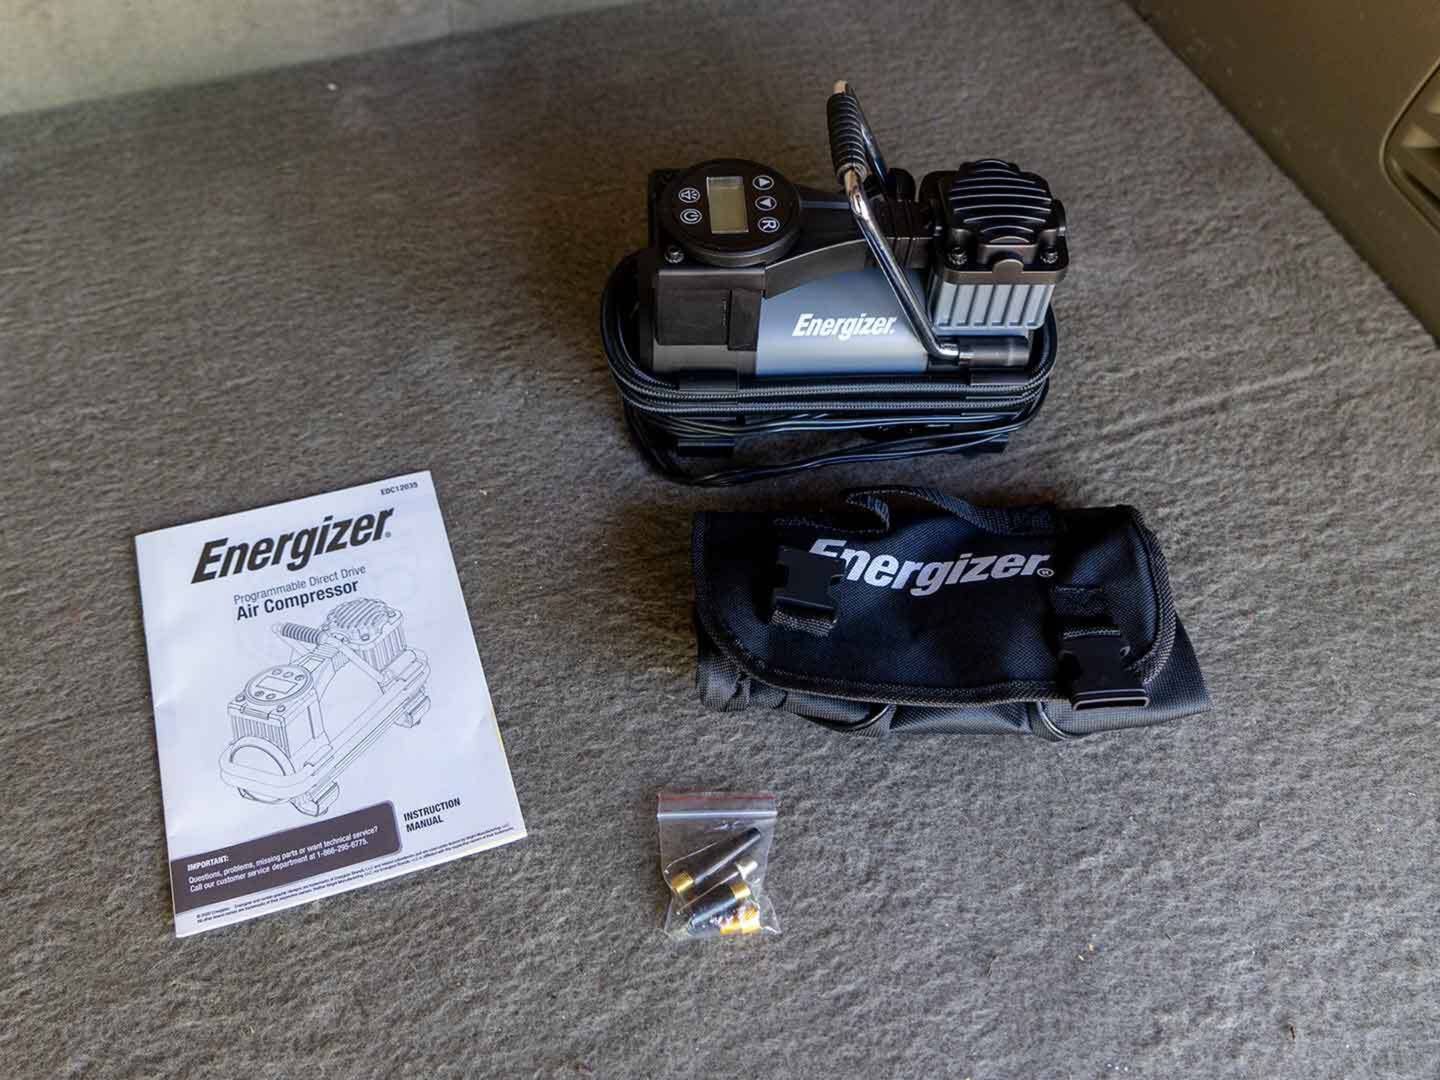 The Energizer's adapters, bag, and instructions. 